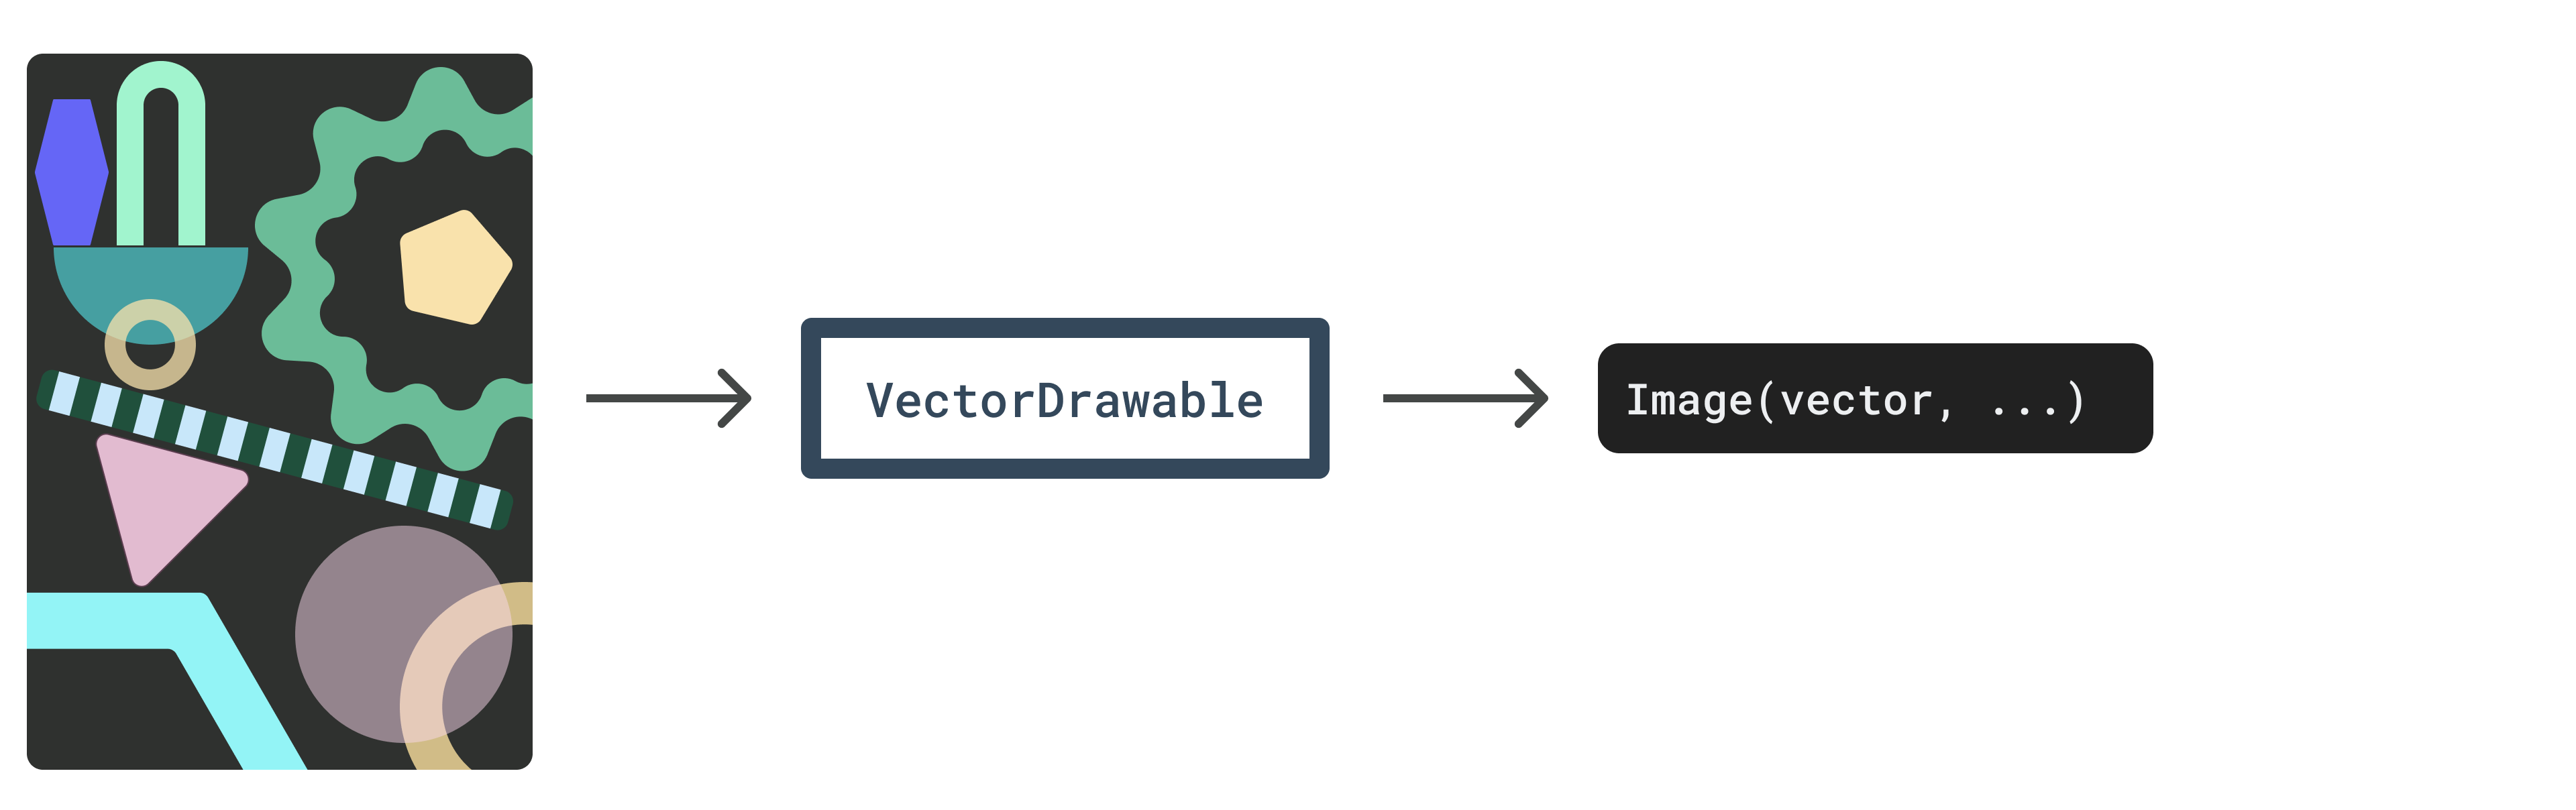 Diagram - Vector layers to VectorDrawable to Image